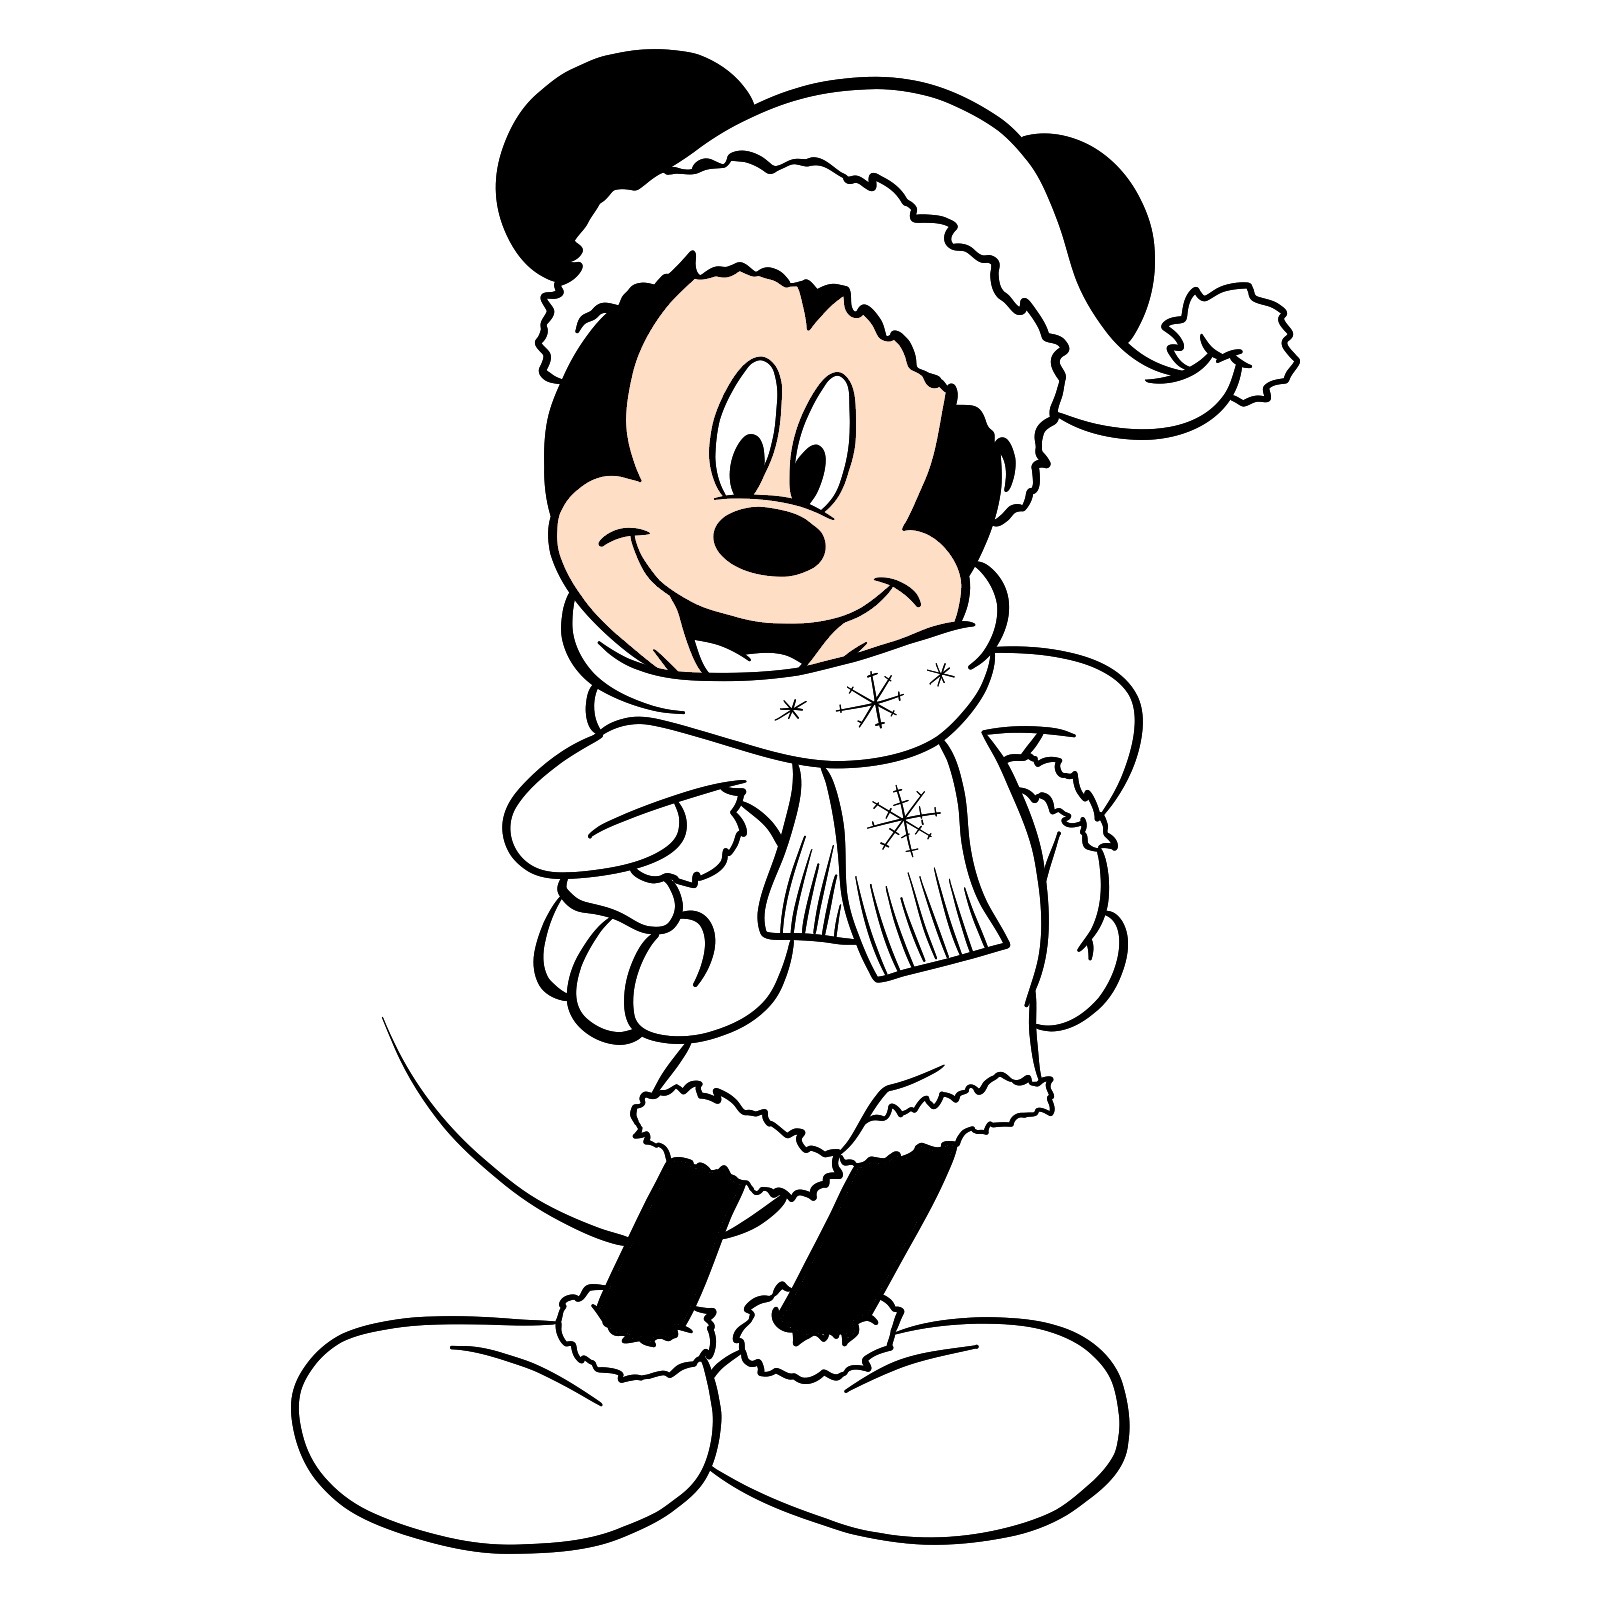 How to draw Santa Mickey Mouse - step 36